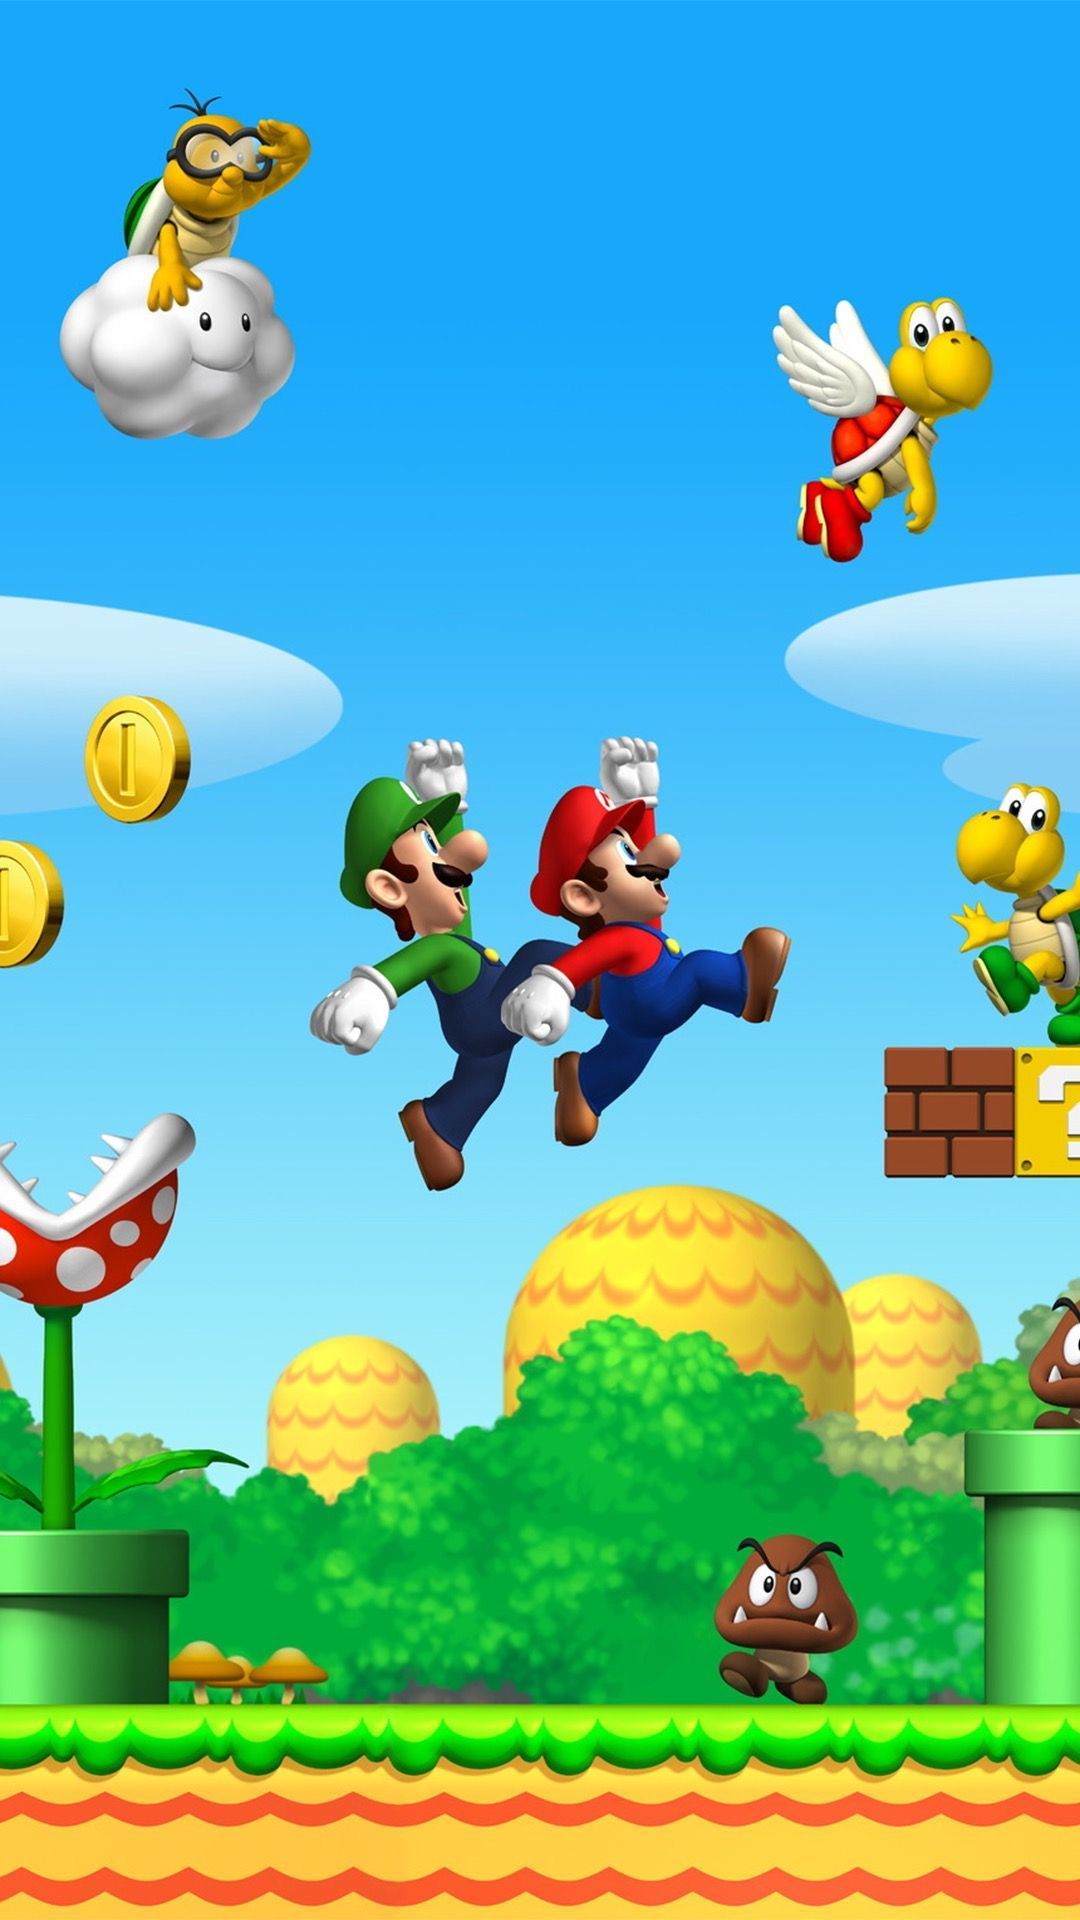 Details more than 63 super mario bros wallpaper best - in.cdgdbentre